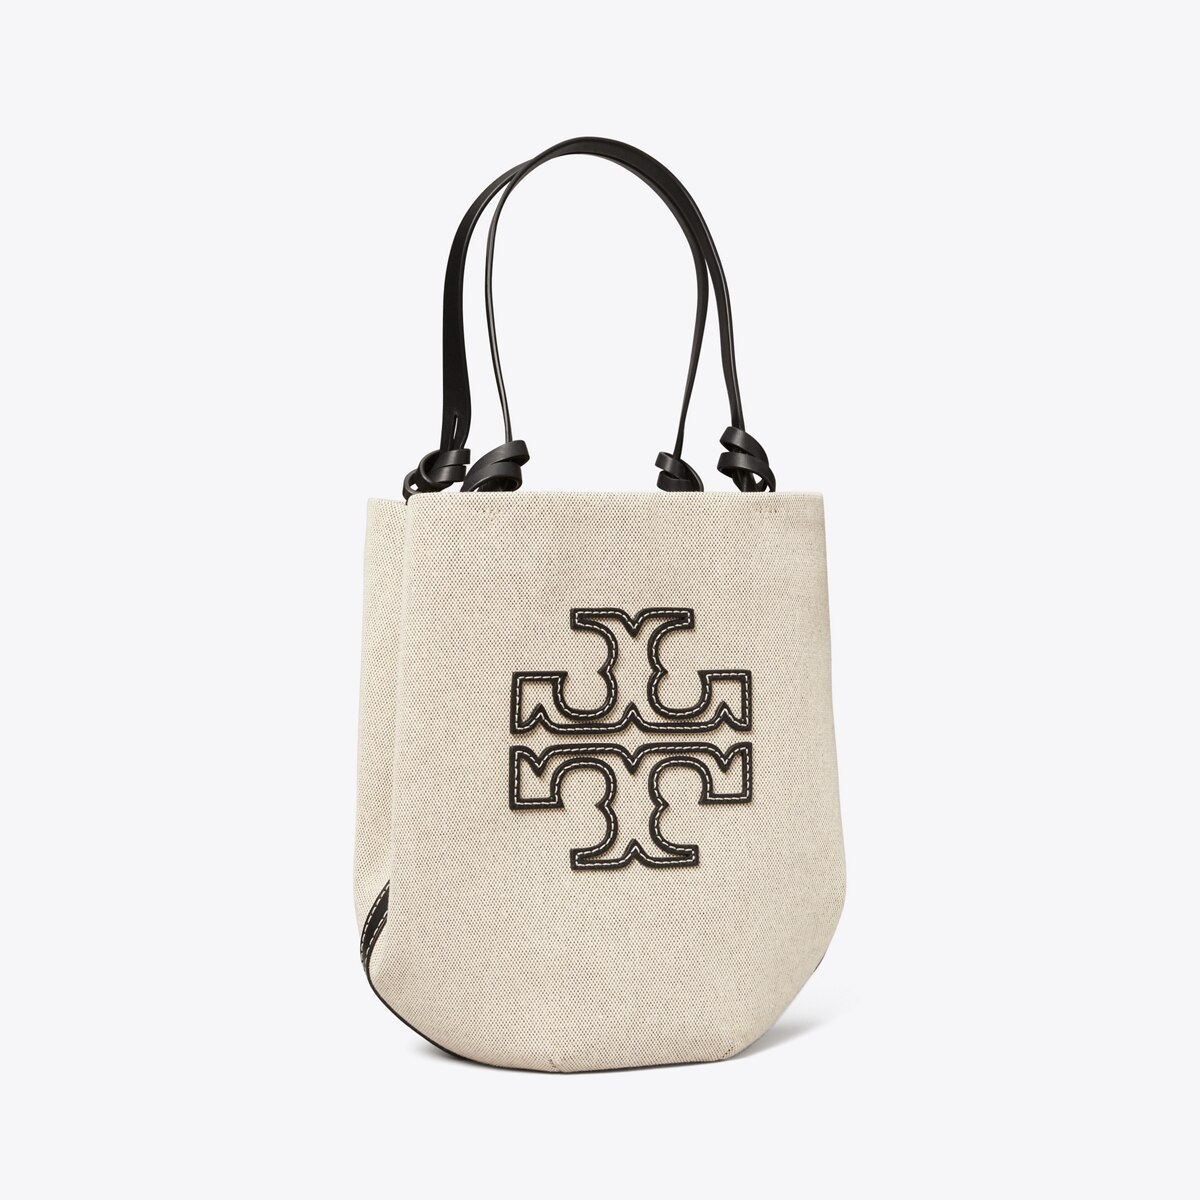 Arriba 59+ imagen small canvas round tote tory burch